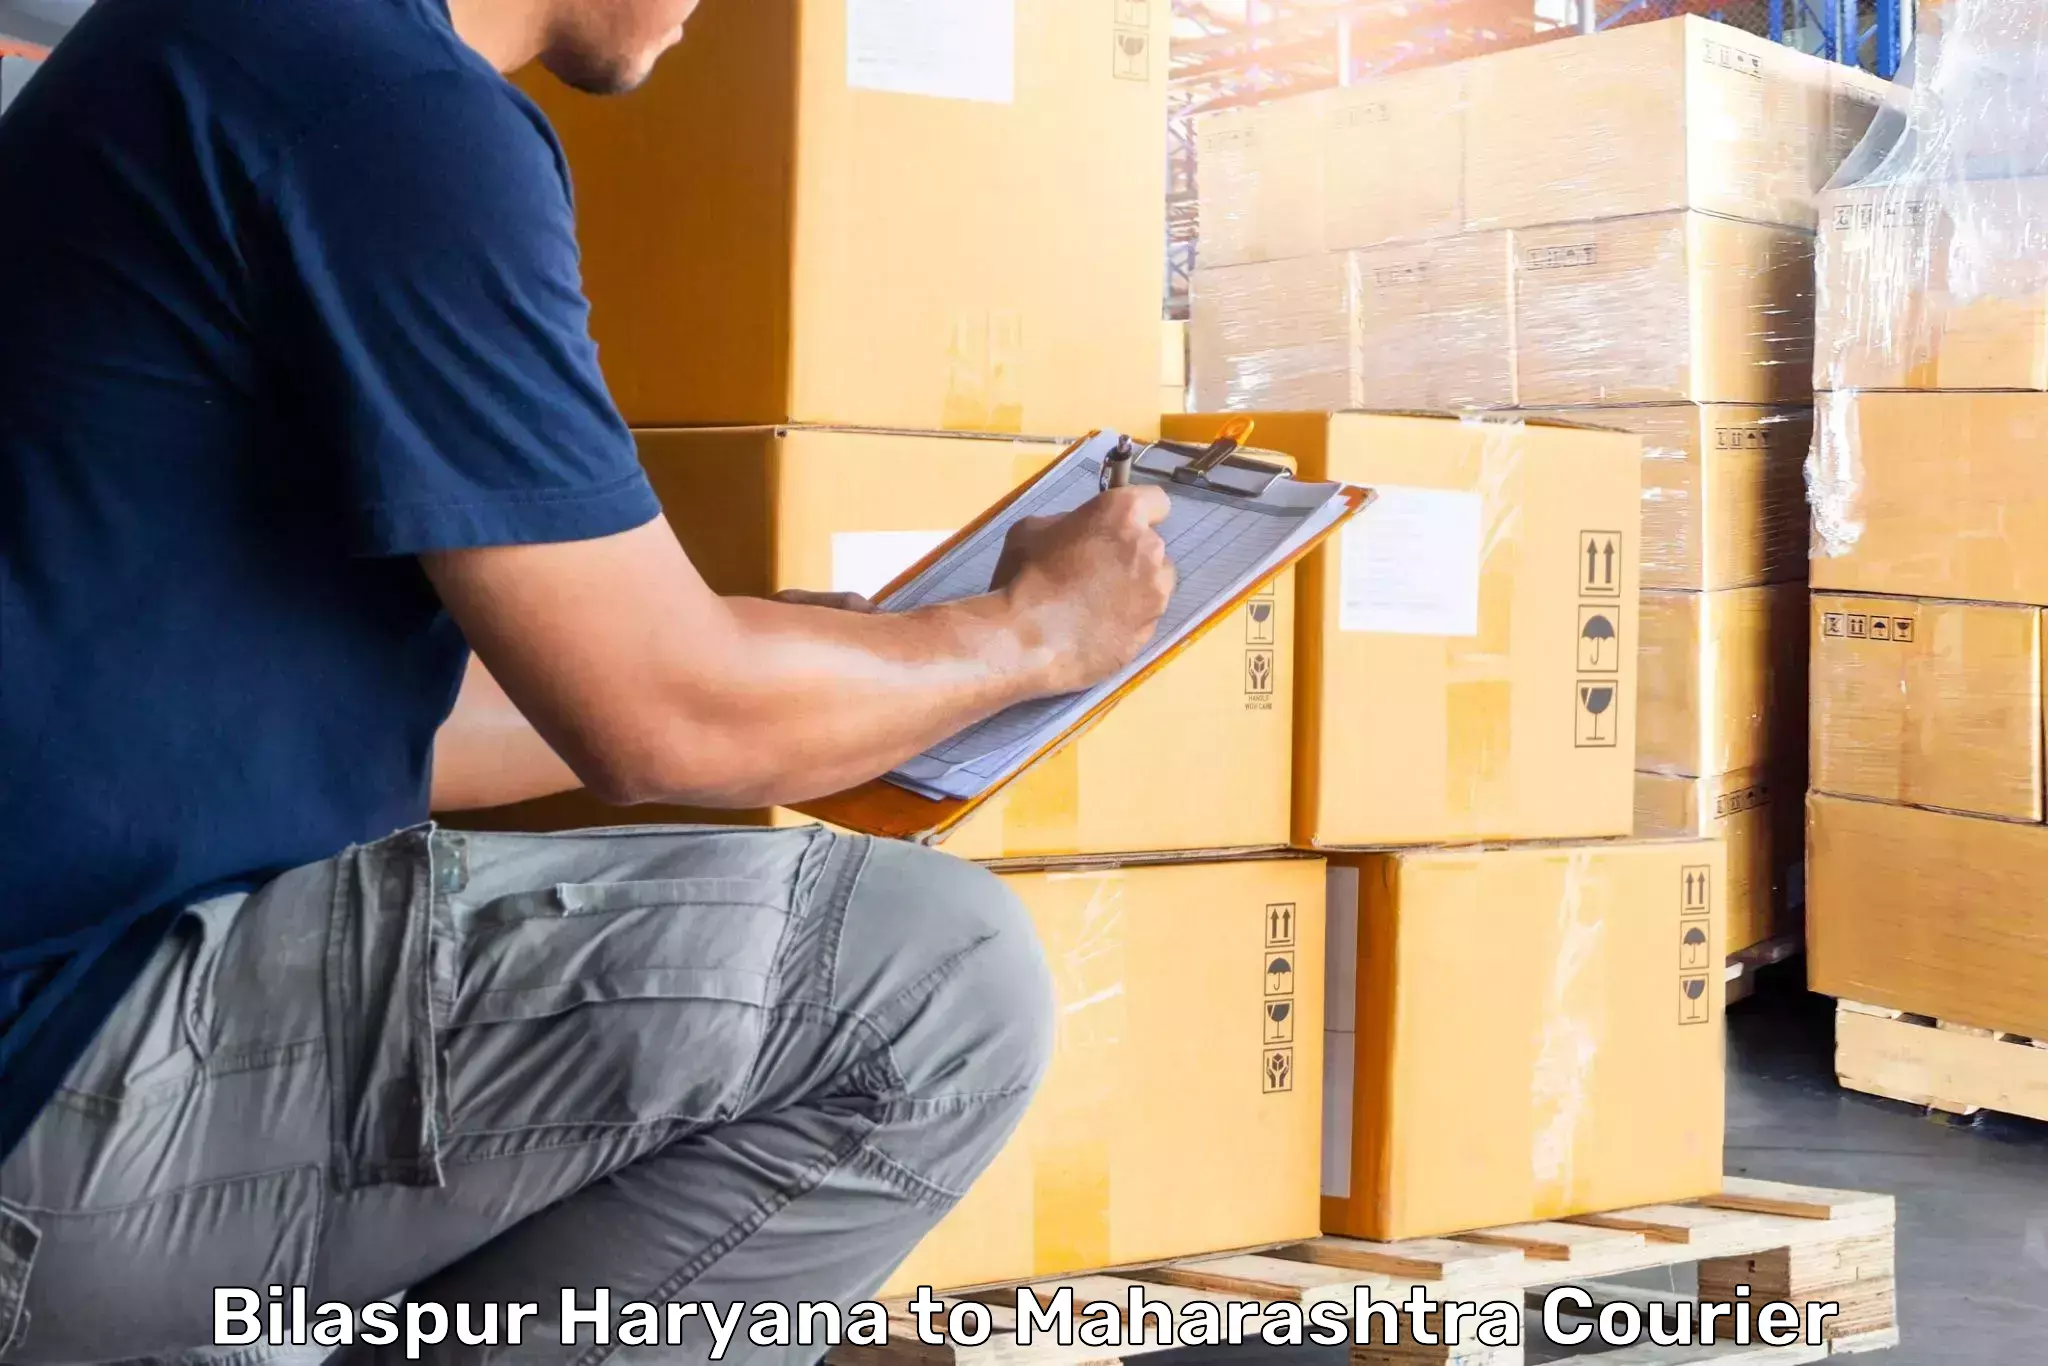 Instant baggage transport quote Bilaspur Haryana to Yeola